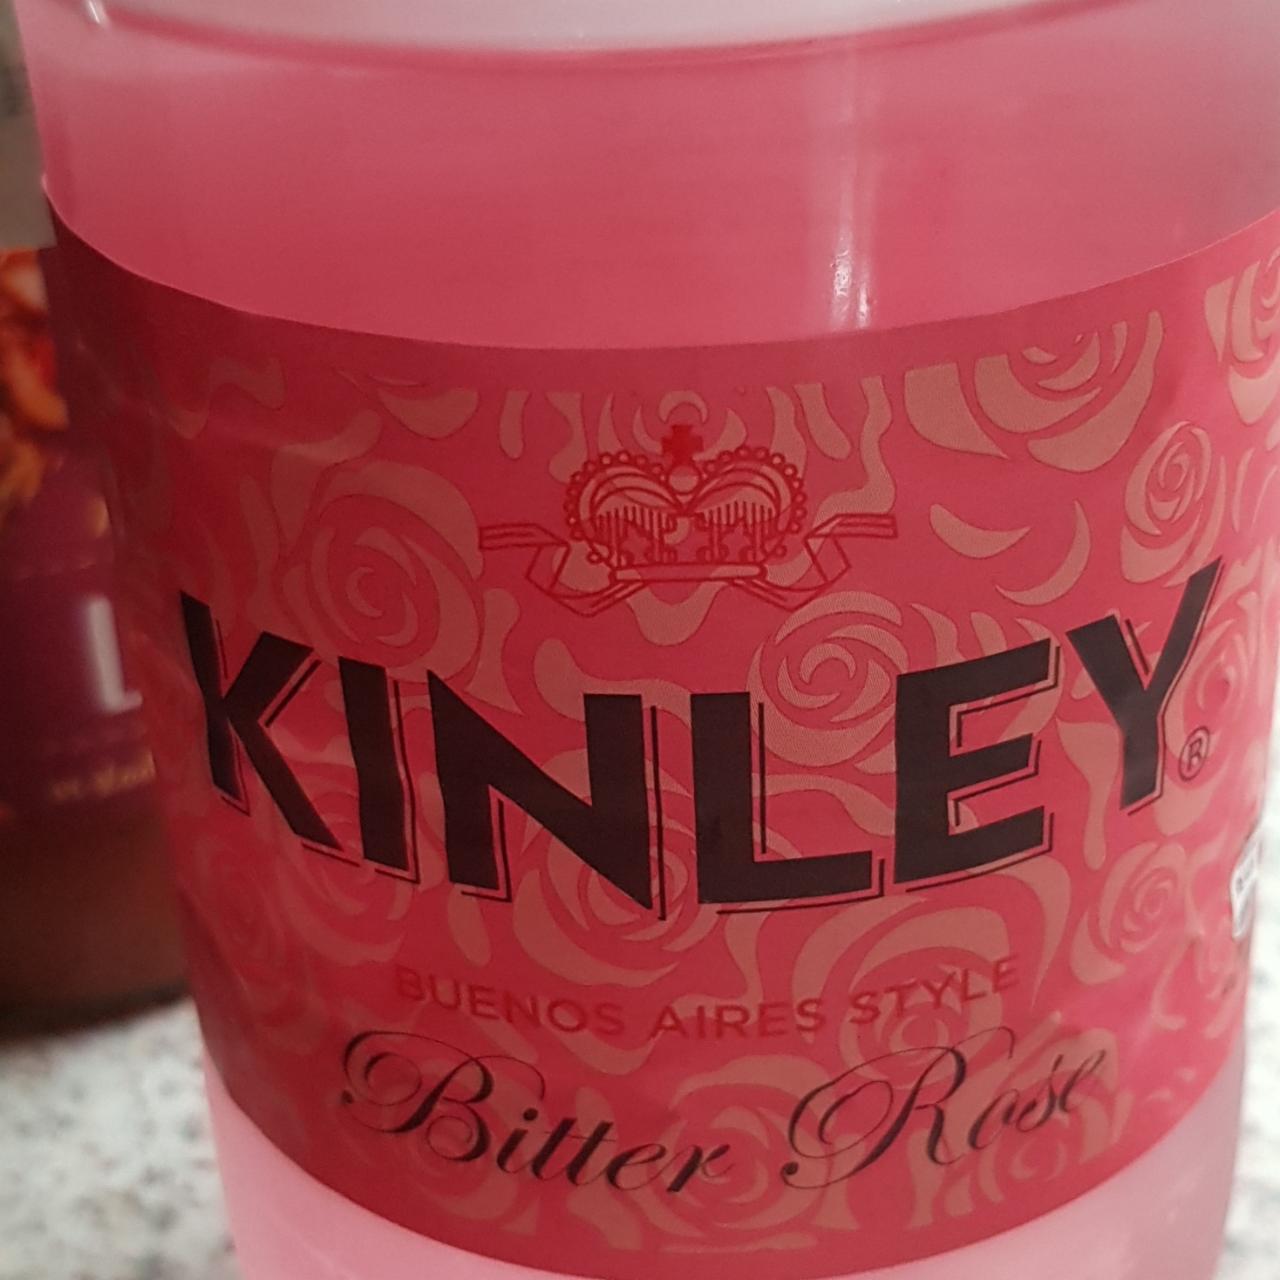 Fotografie - Buenos Aires style Bitter Rose Kinley